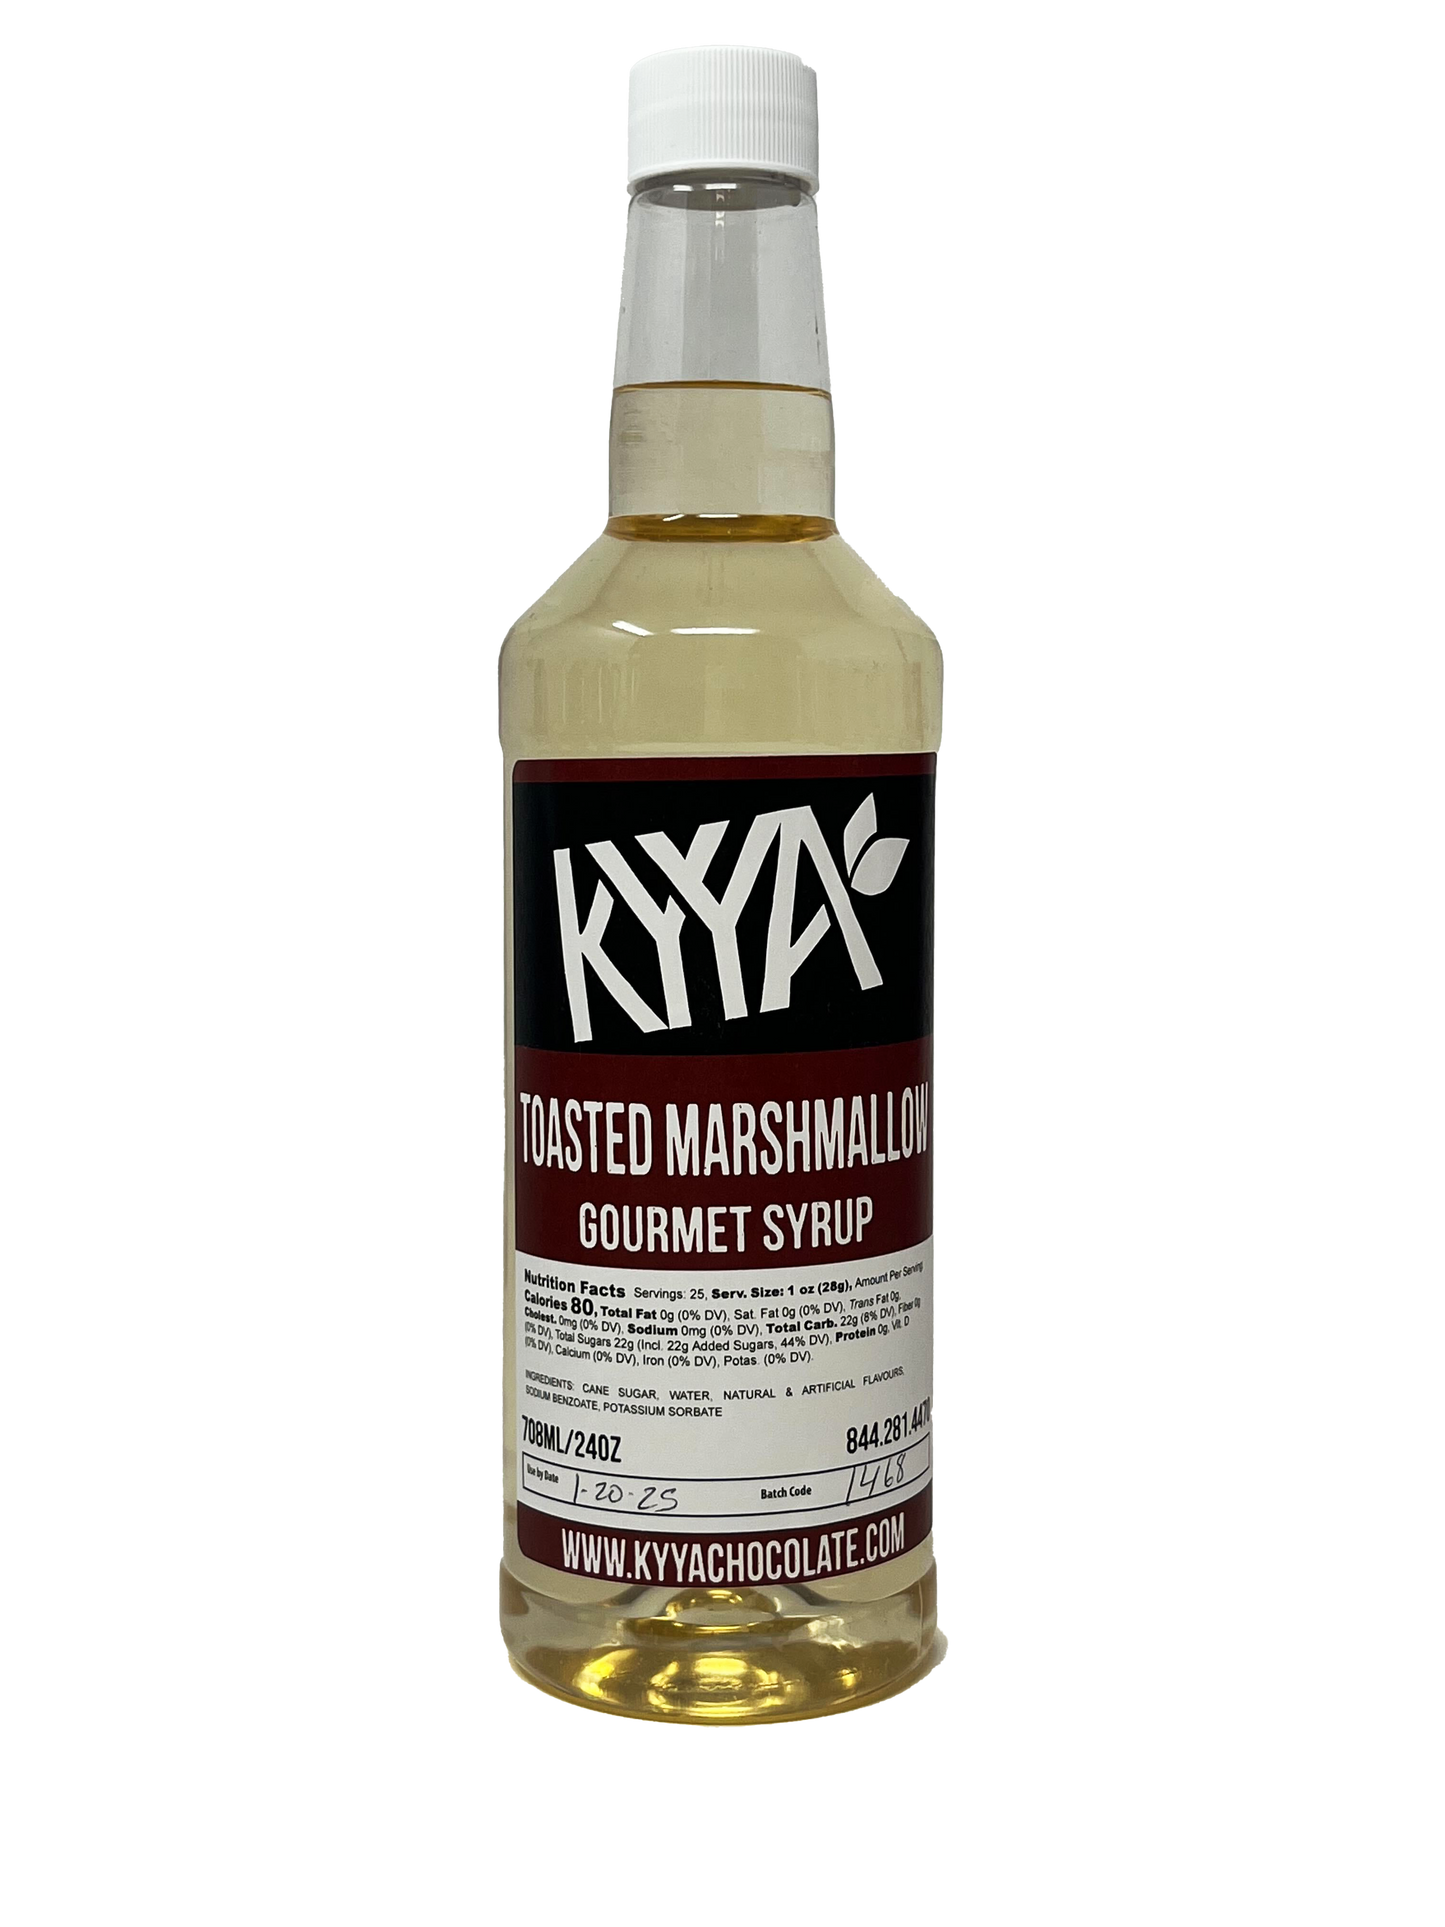 Toasted Marshmallow Gourmet Syrup